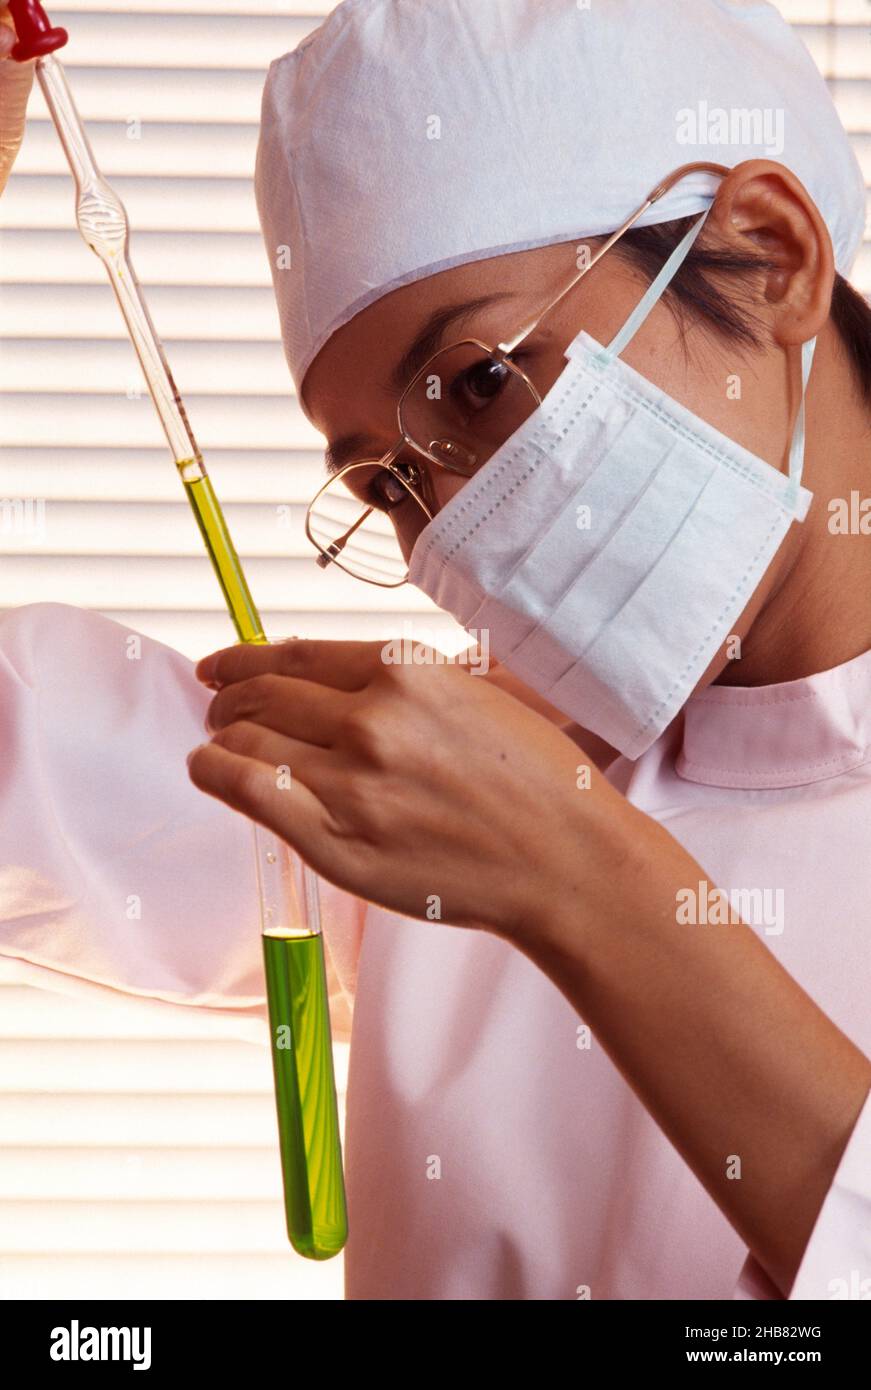 Japan. Close up of young woman working in biofuels laboratory. Stock Photo